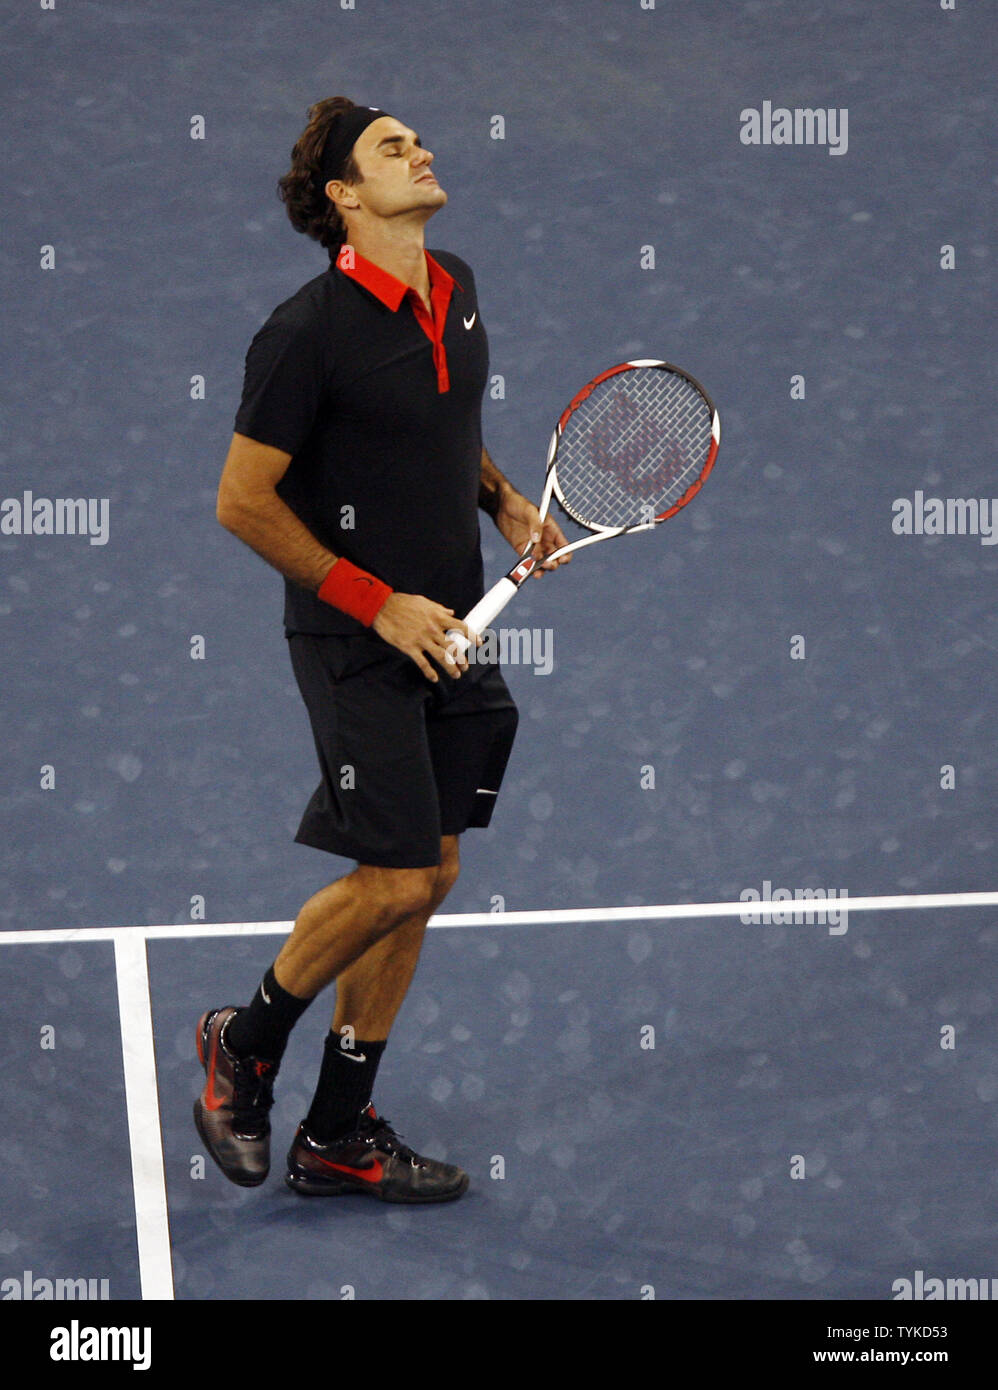 Roger Federer of Switzerland reacts after losing a point to Juan Martin Del Potro of Argentina in the fourth set of their mens final match in Arthur Ashe Stadium at the US Open Tennis Championships at the Billie Jean King National Tennis Center in New York on September 14, 2009.     UPI/John Angelillo Stock Photo